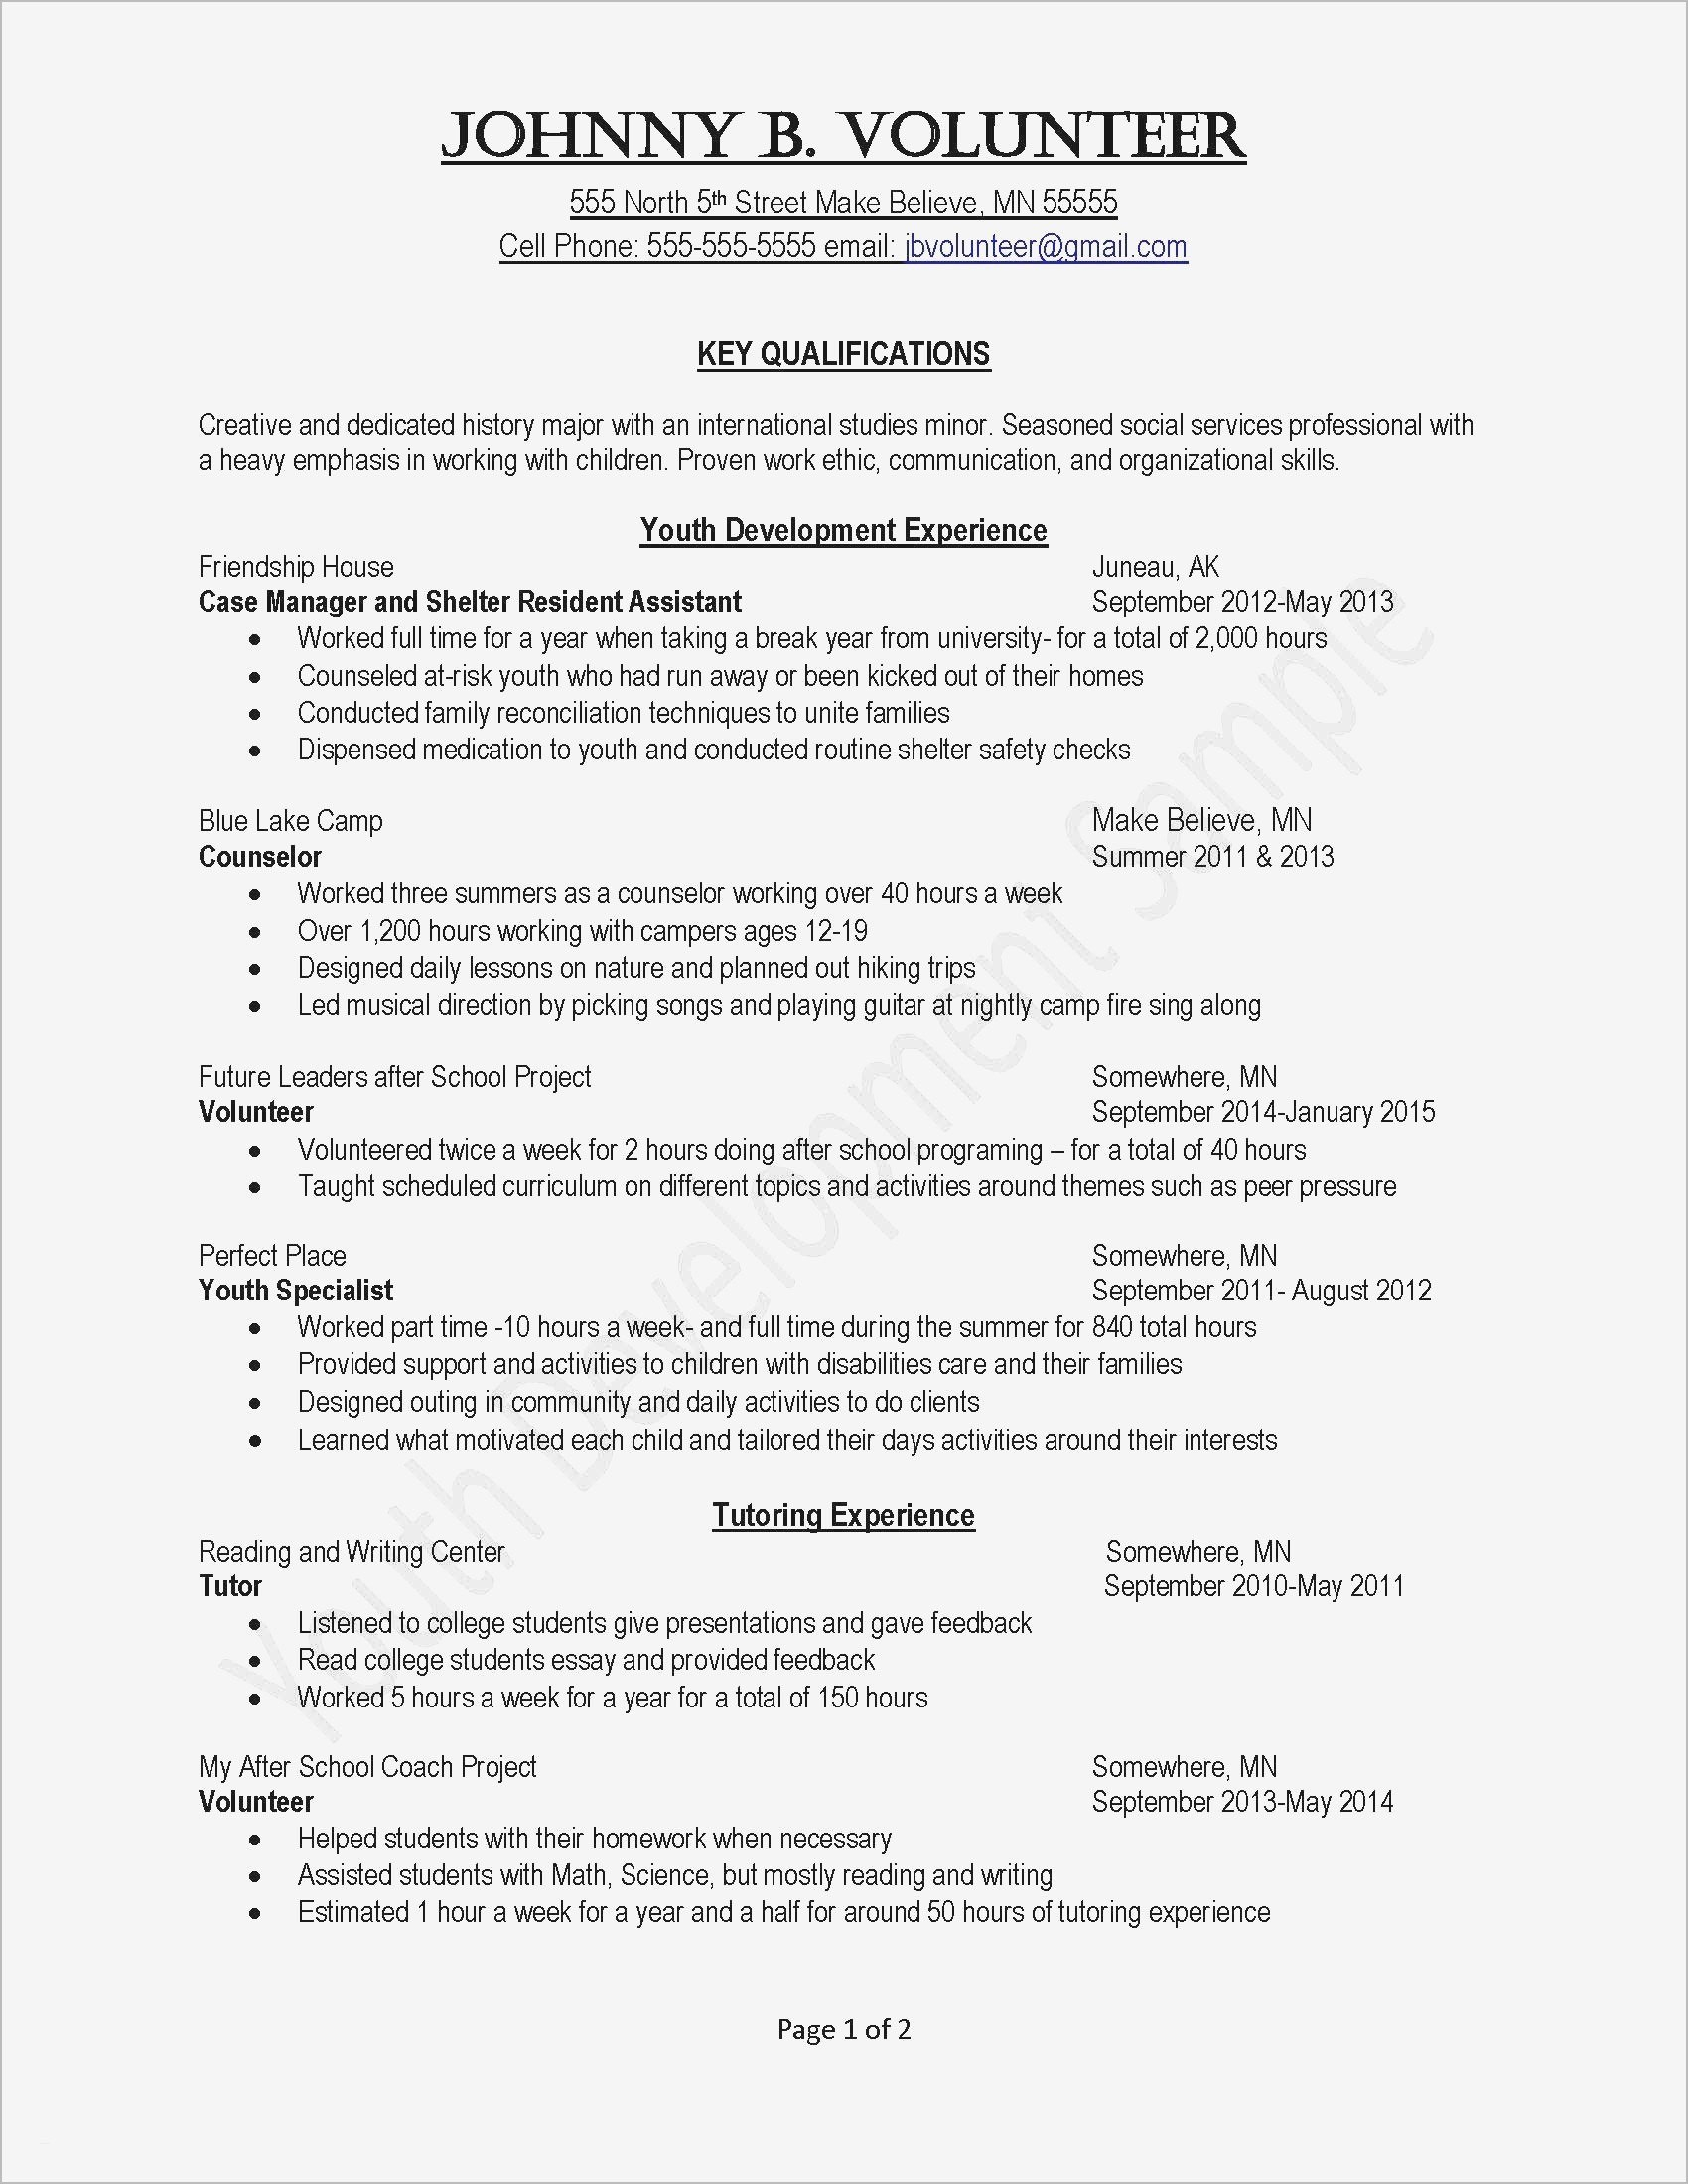 Cover Letter for Teaching Job Template - Cover Letter Sample for Teaching Job Refrence Job Fer Letter